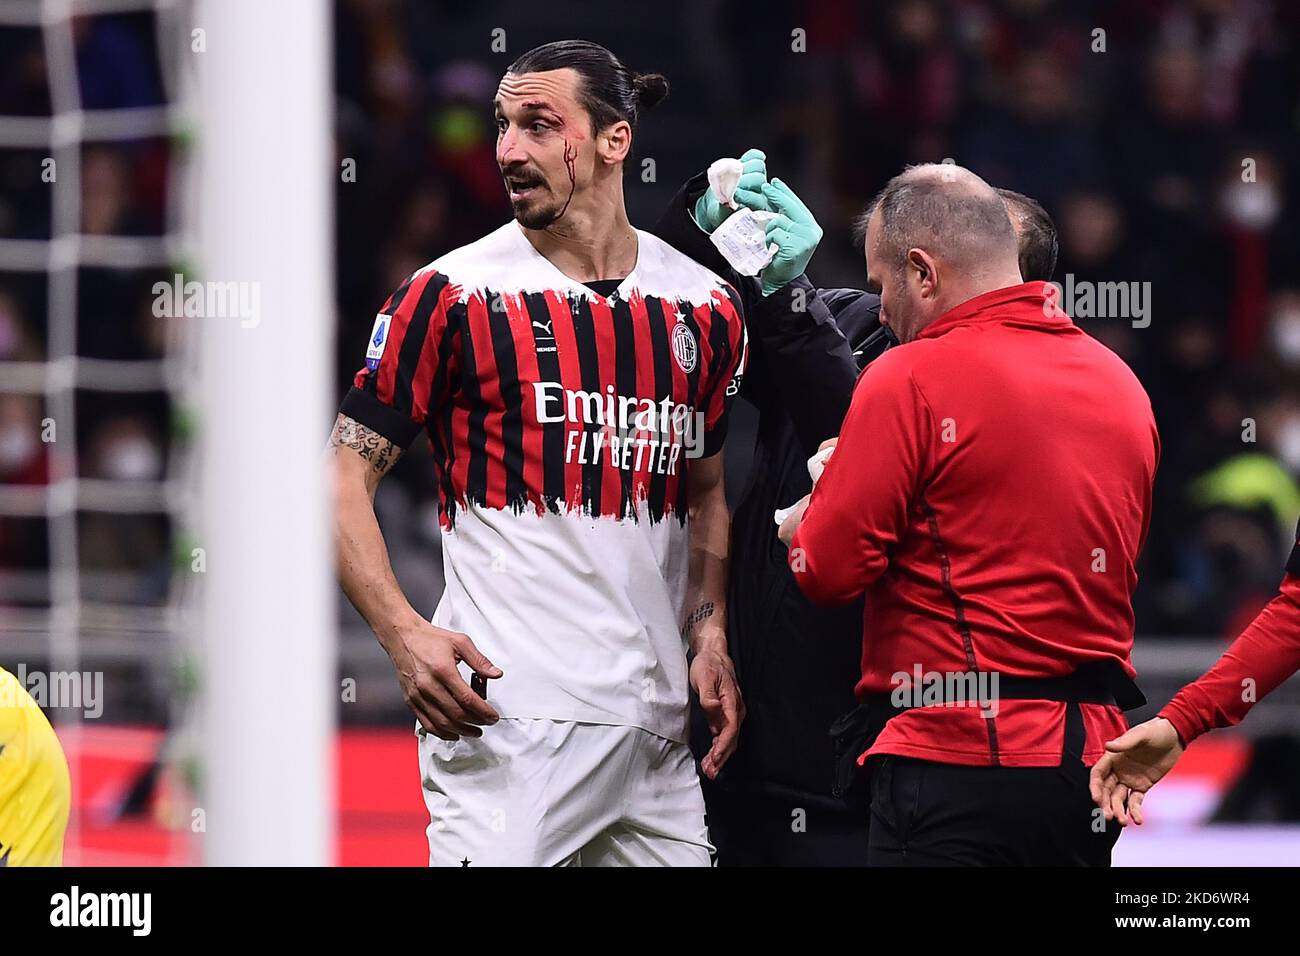 Bloody Zlatan Ibrahimovic of A.C. Milan during the Italian Serie A soccer match between A.C. Milan vs Bologna F.C. at the San Siro Stadium in Milan, Italy on 4 April 2022. (Photo by Michele Maraviglia/NurPhoto) Stock Photo